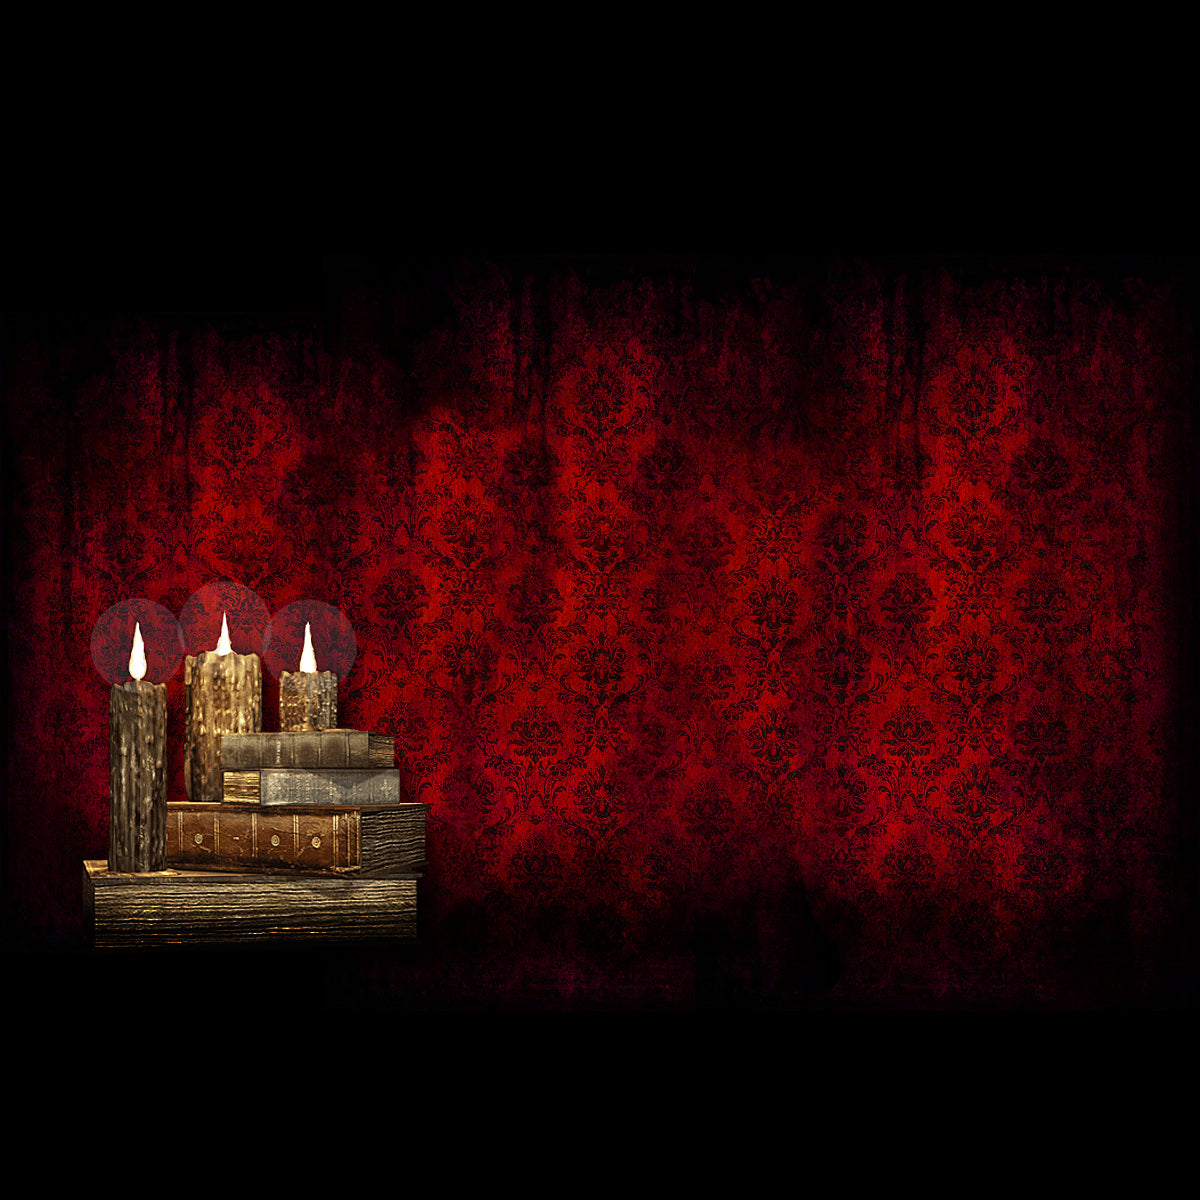 Image of our top-rated animated furniture, part of our Haunted House Animatronics collection, in a haunted house scene